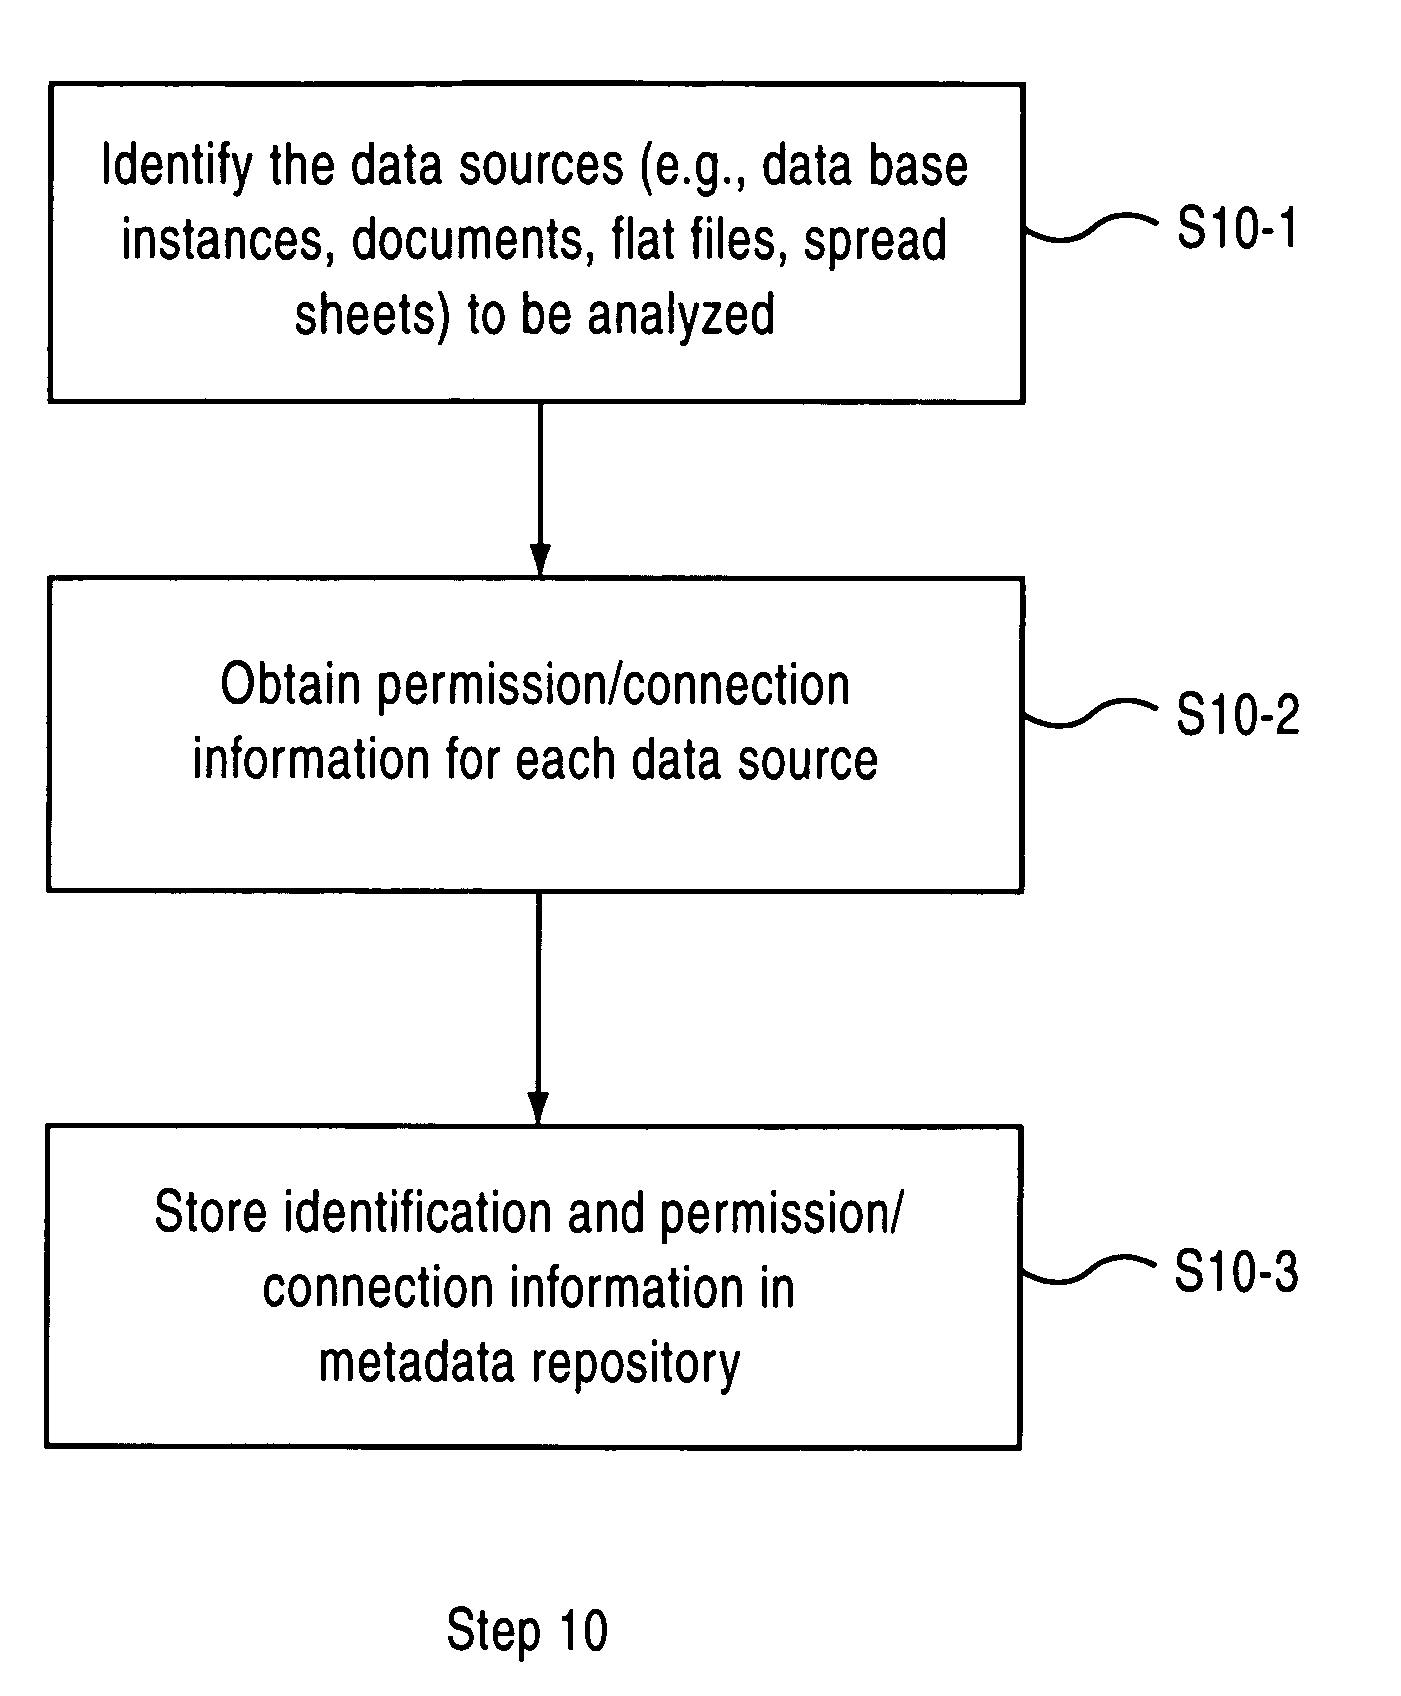 System and method for analyzing data sources to generate metadata